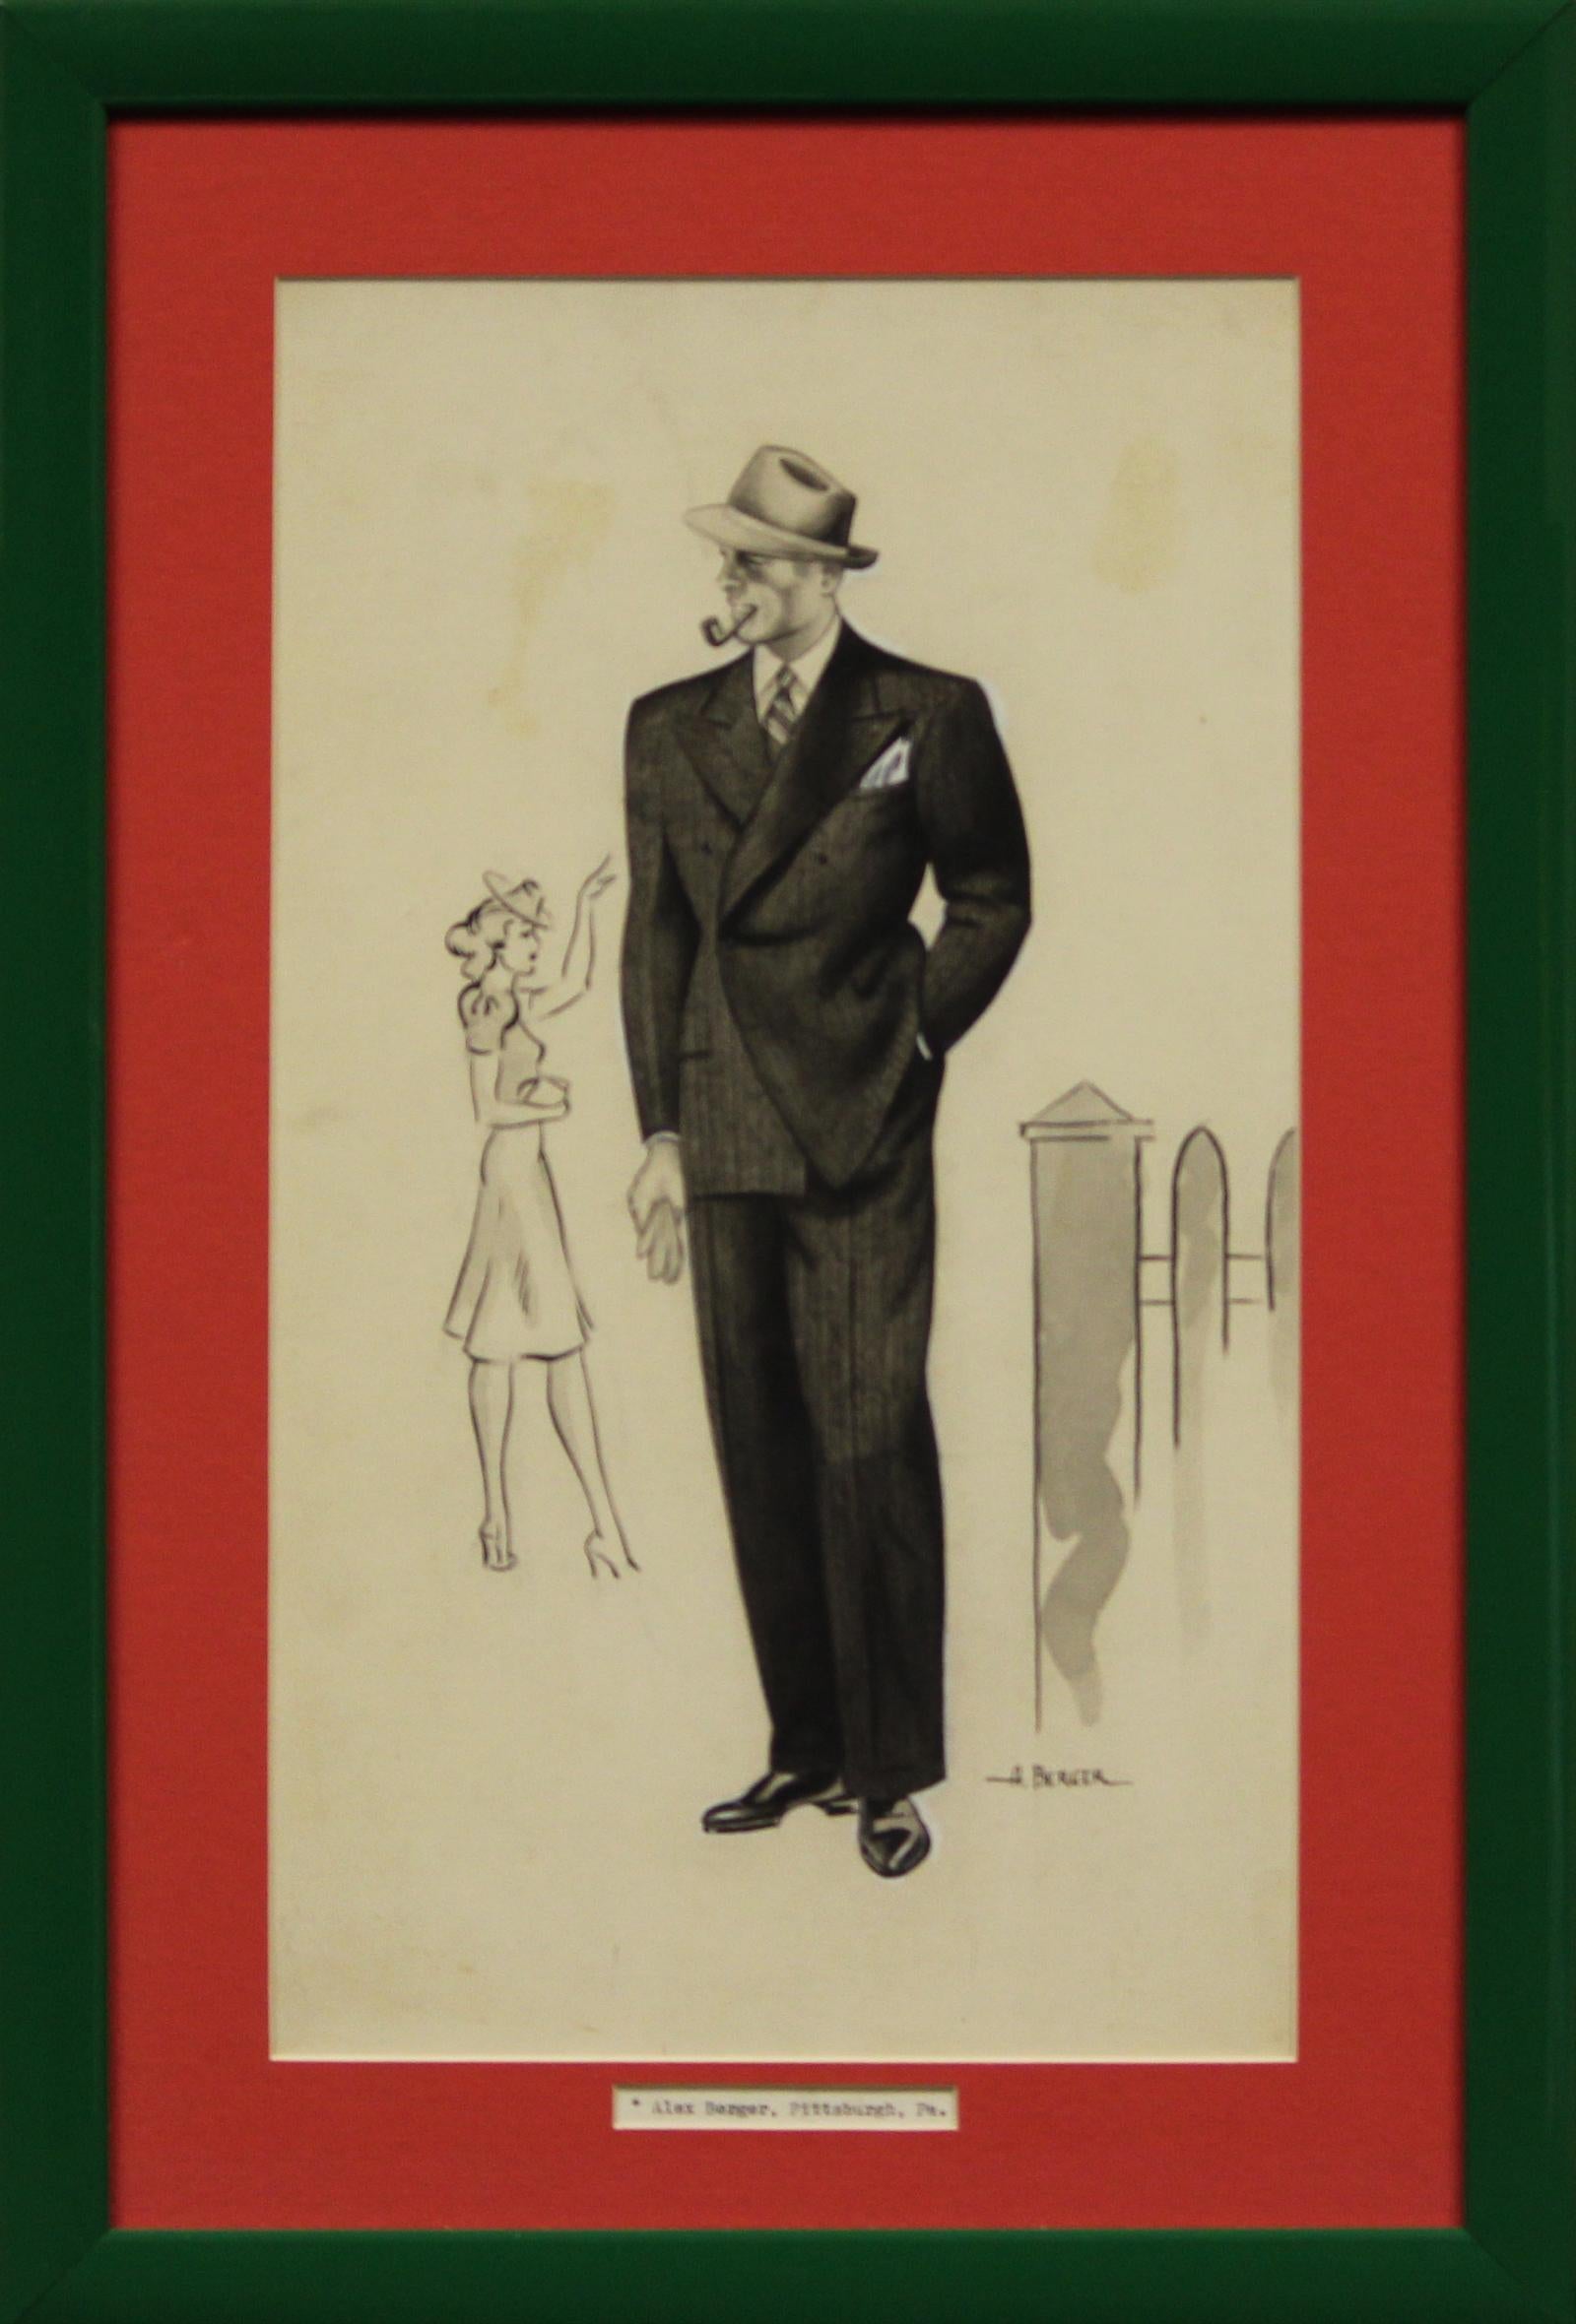 Classic original menswear watercolour & gouache c1938 illustration depicting a dapper/ pipe smoking gent sporting a double-breasted herringbone suit with an admiring woman waving signed A(lex) Berger, Pittsburg, PA

Art Sz: 14"H x 8"W

Frame Sz: 18